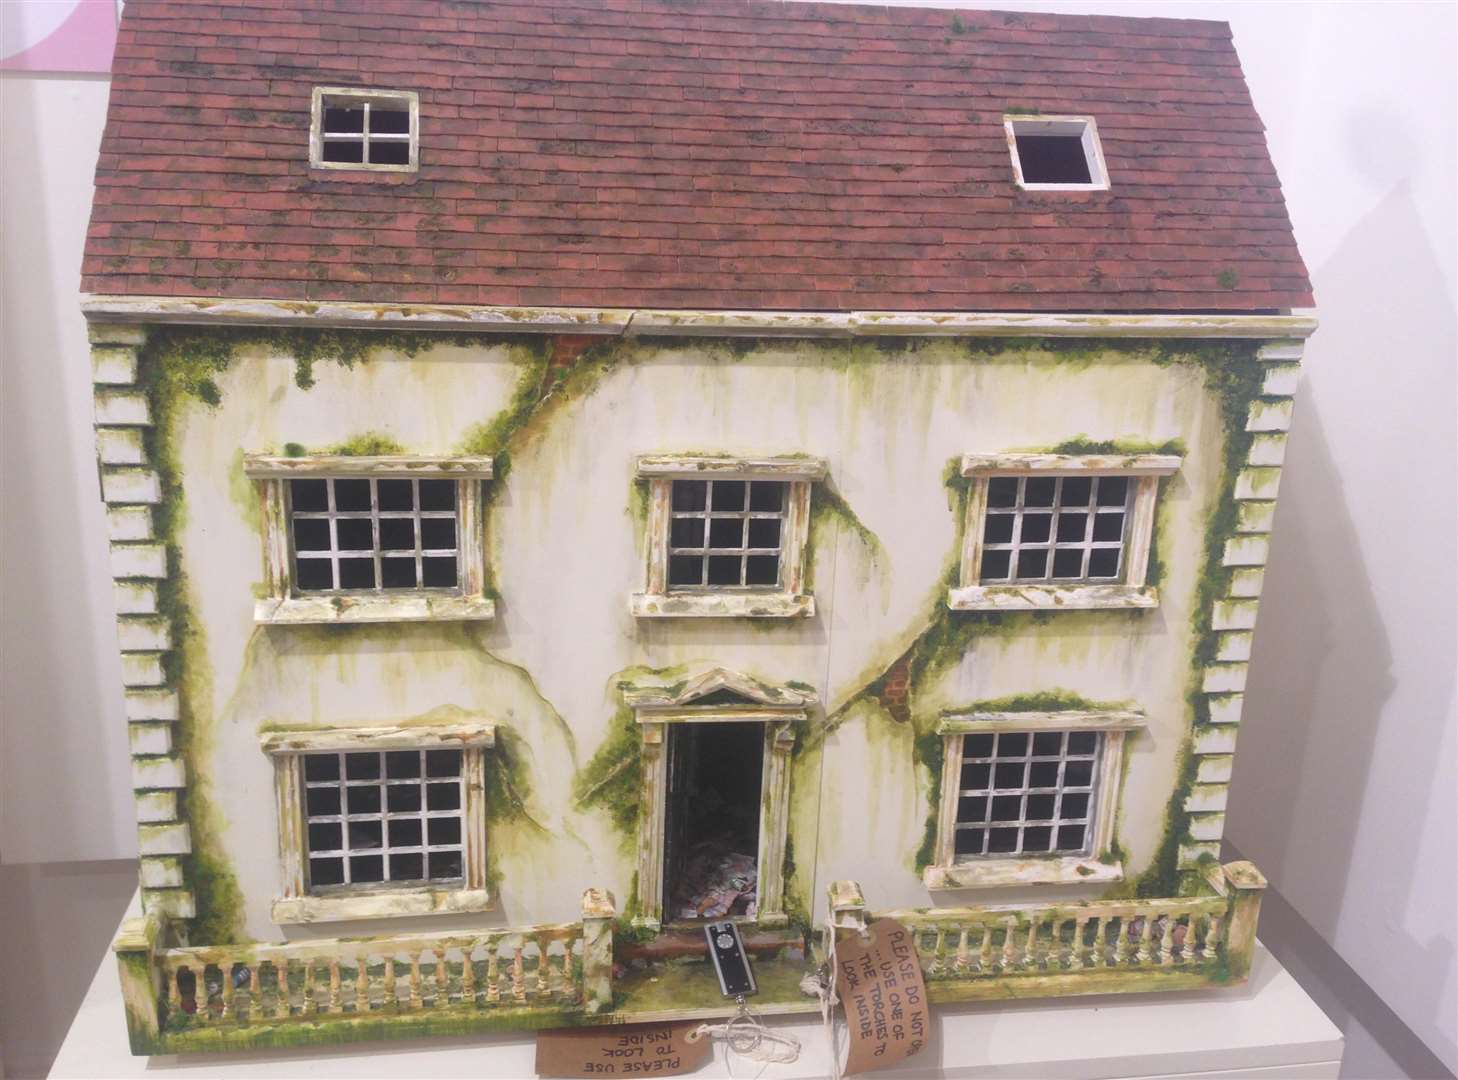 Re-Imagining the Doll's House at Maidstone Museum